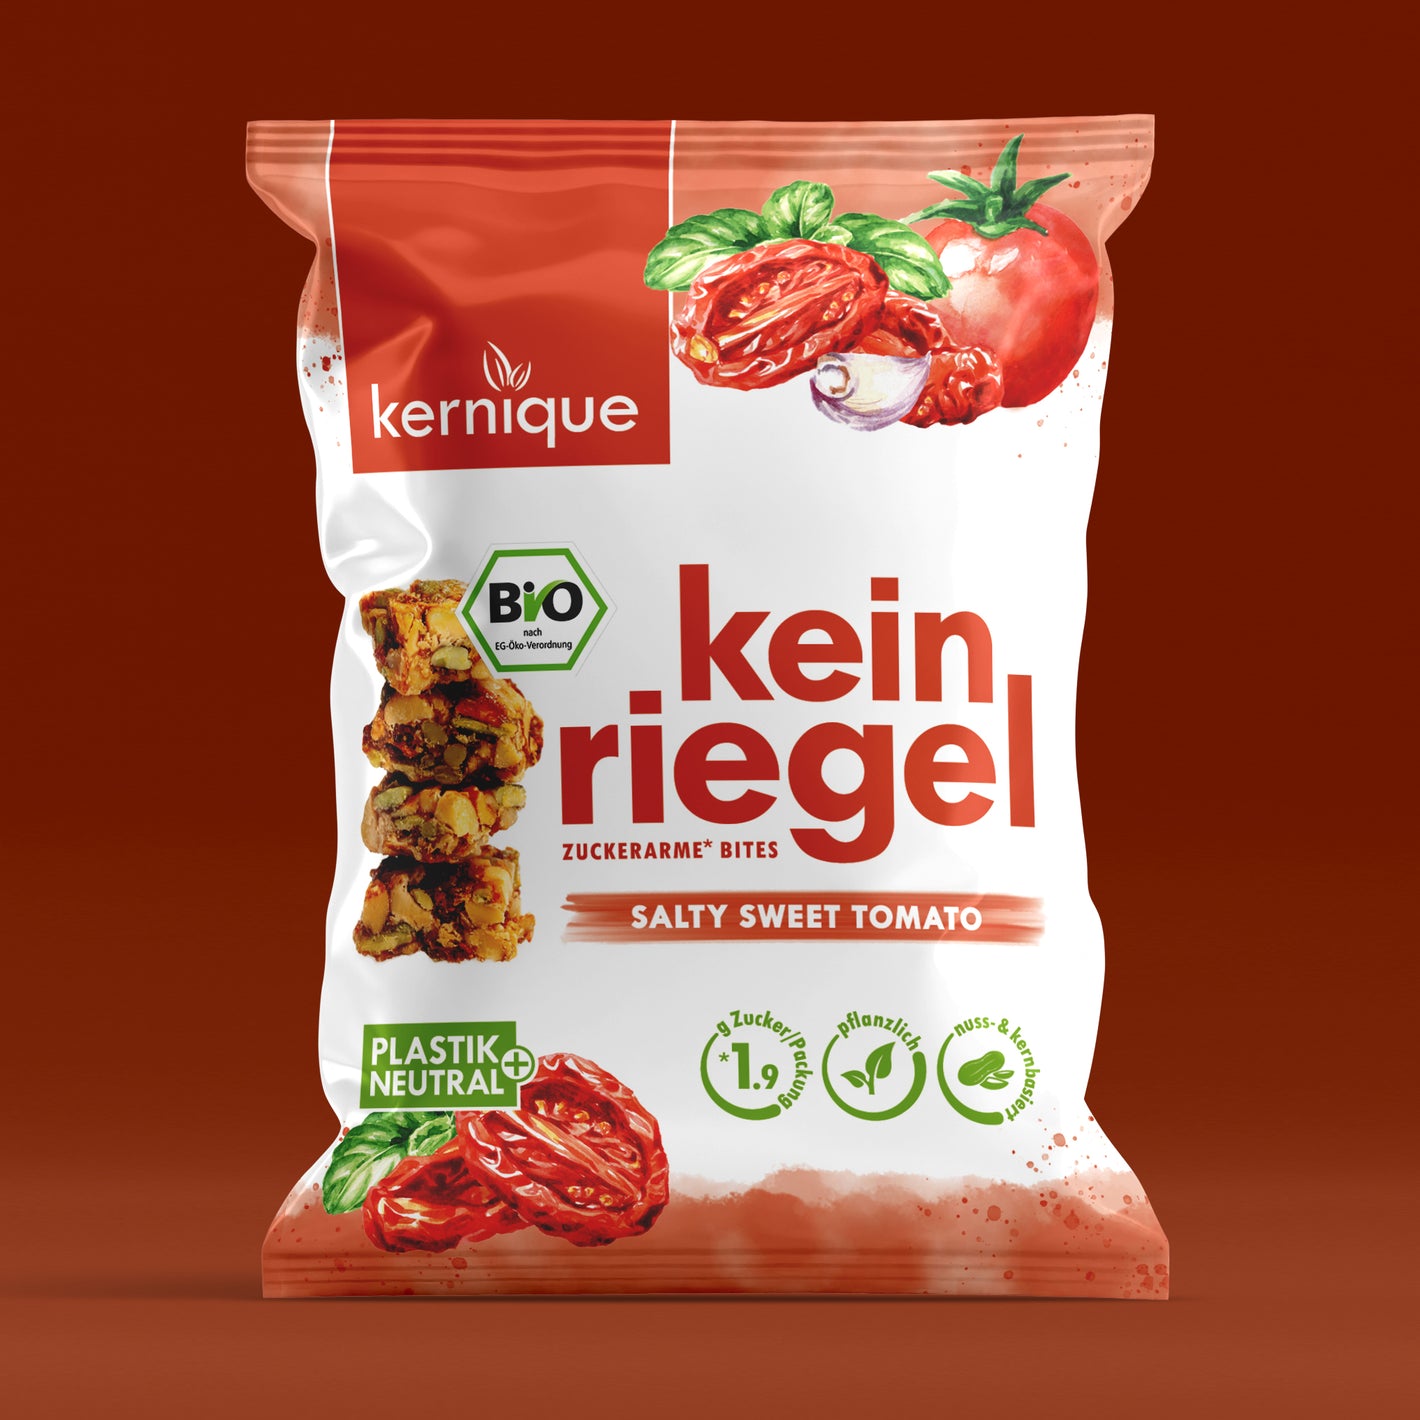 Verpackung kernique kein riegel salty sweet tomato